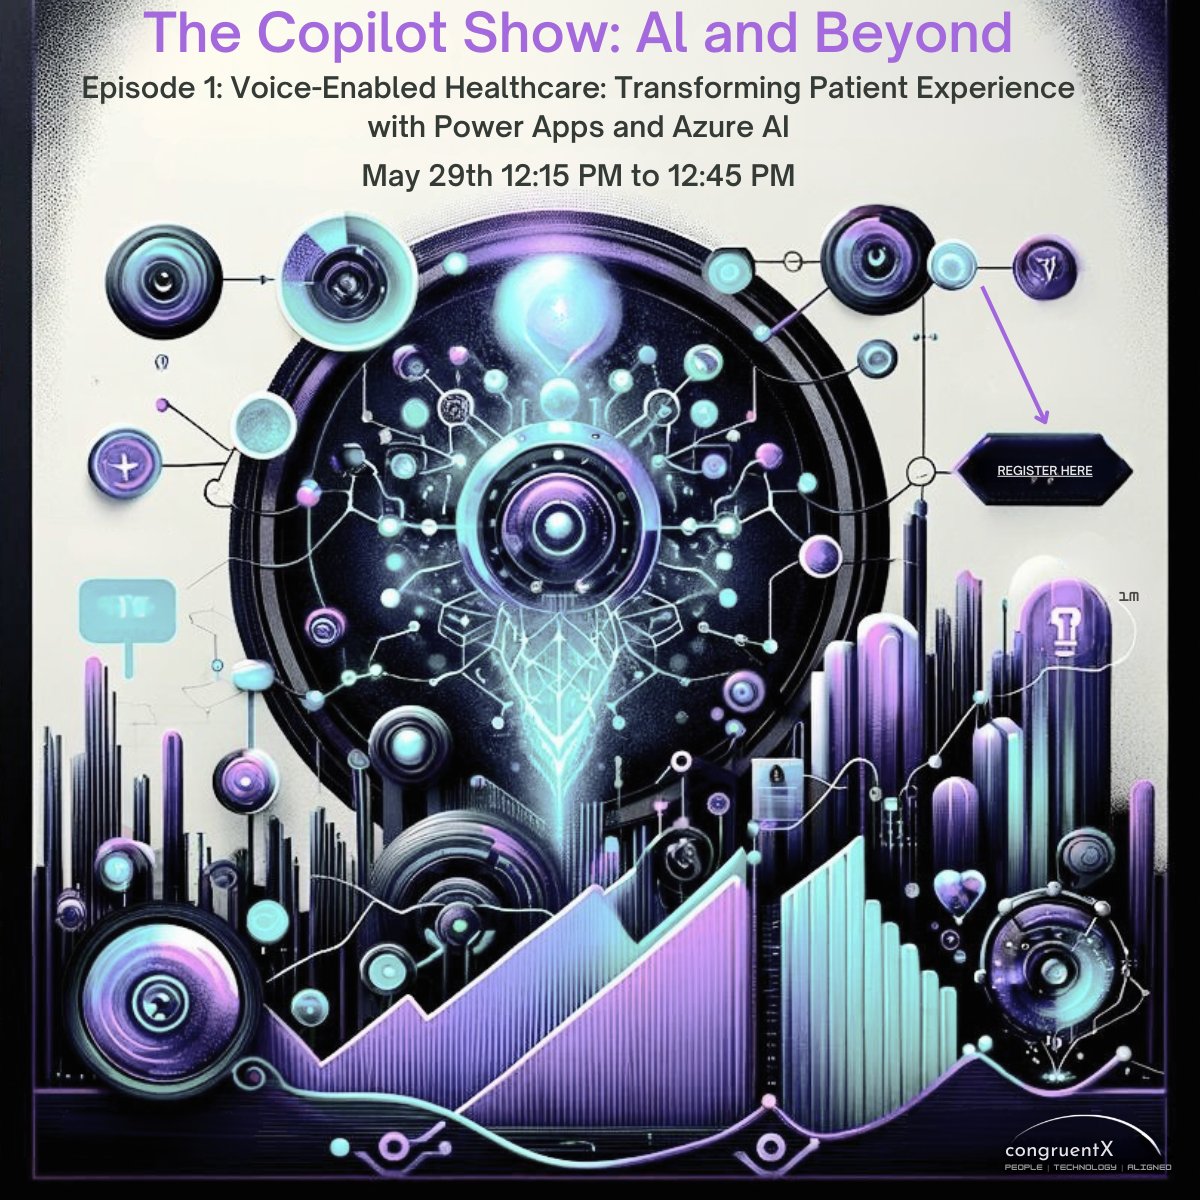 Join us for the launch of 'The Copilot Show: AI and Beyond' with Chris Cognetta on May 29!  Our first episode has special guest Igor Shvets, who will chat about the transformative world of voice-enabled healthcare. #AIHealthcare #congruentX #CRM #AI hubs.li/Q02vnP9r0